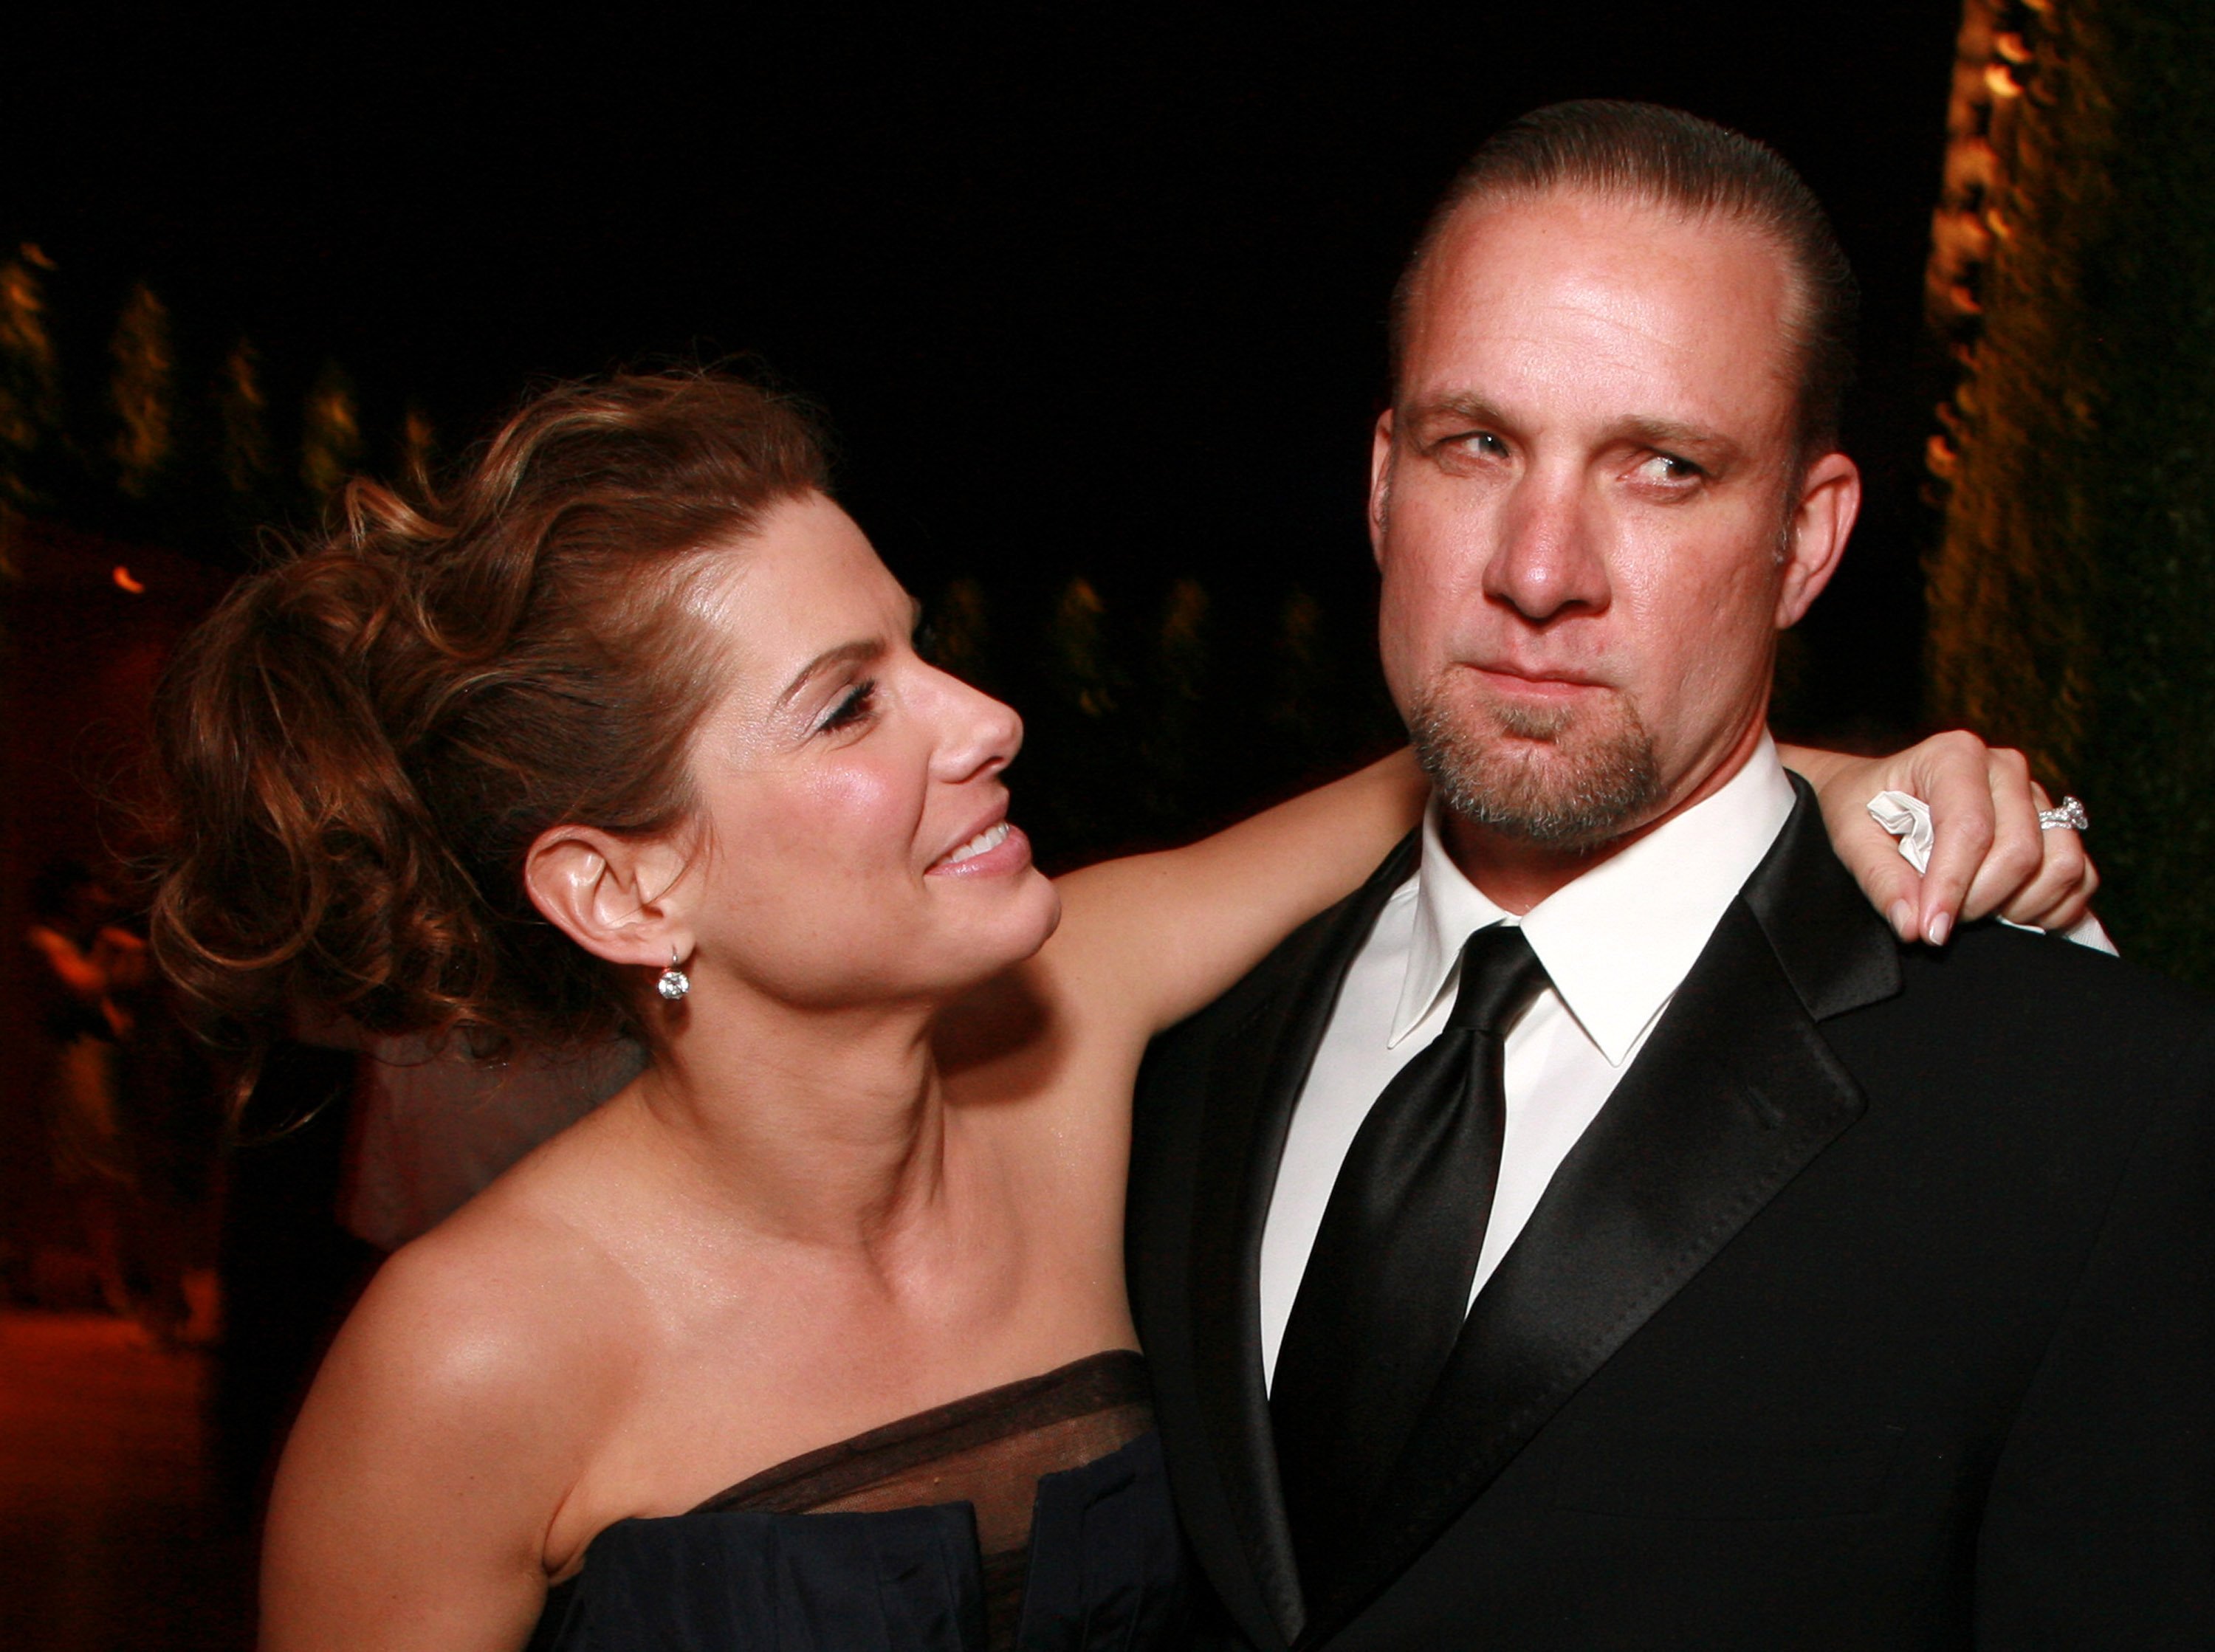 Sandra Bullock and husband Jesse James at the 2006 Vanity Fair Oscar Party. | Source: Getty Images